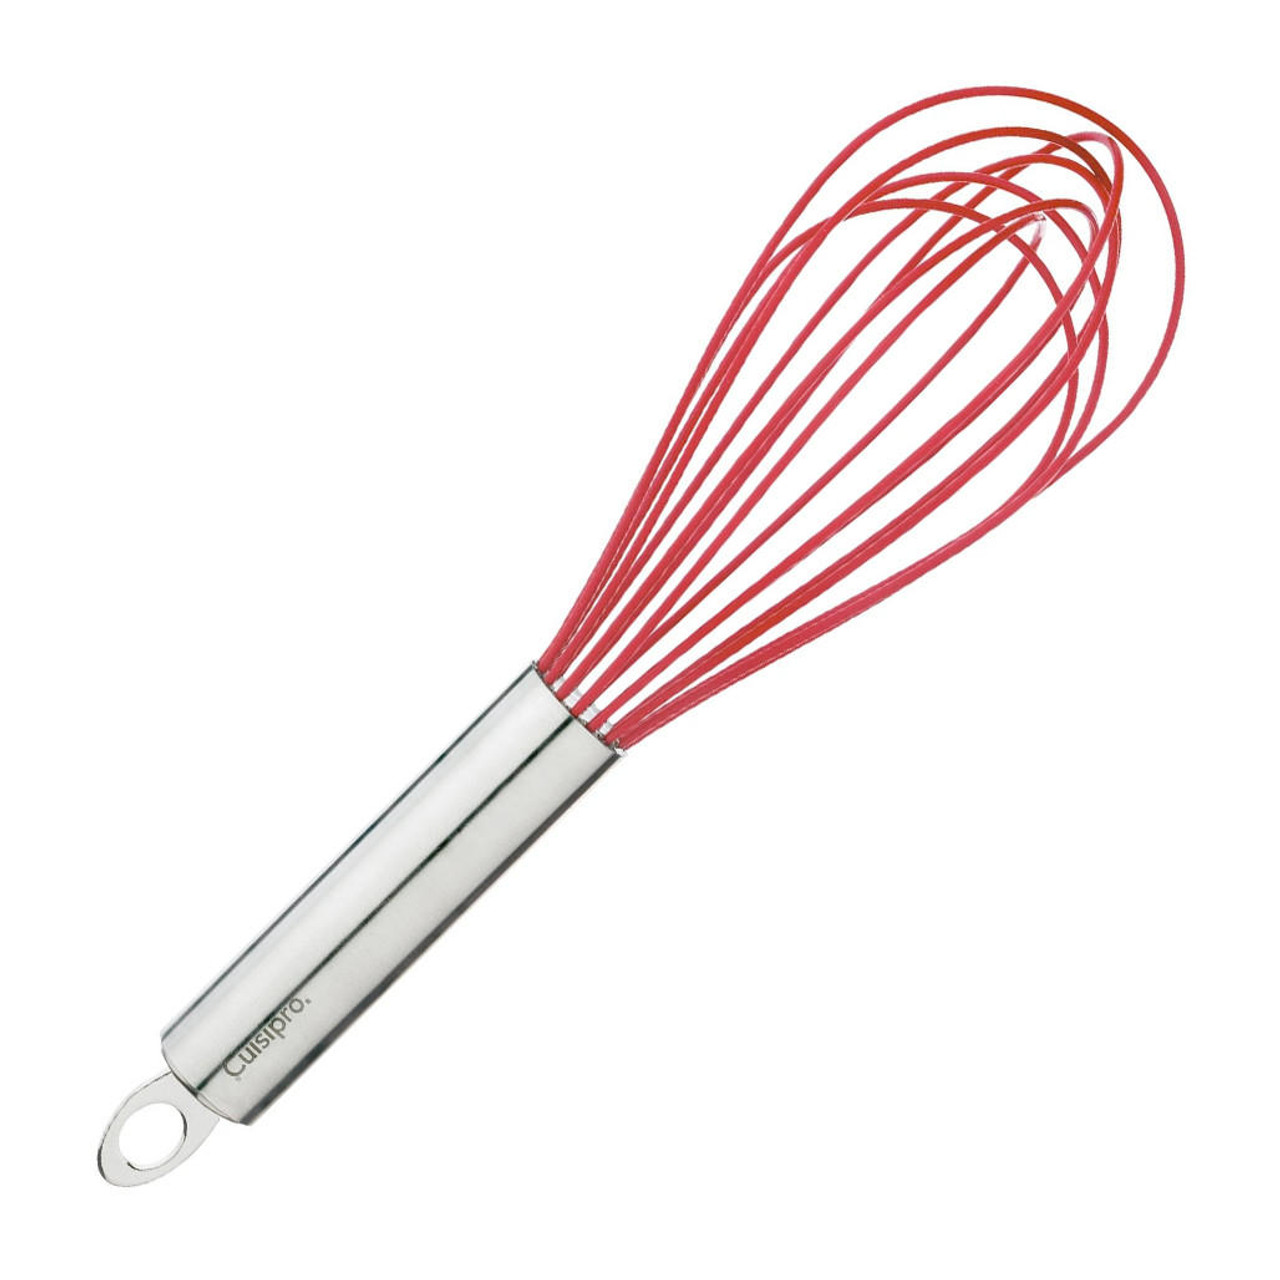 https://cdn11.bigcommerce.com/s-p82jn6co/images/stencil/1280x1280/products/16070/39482/56216-cuisipro-balloon-whisk-red-silicone-10-in__46665.1690134636.jpg?c=2